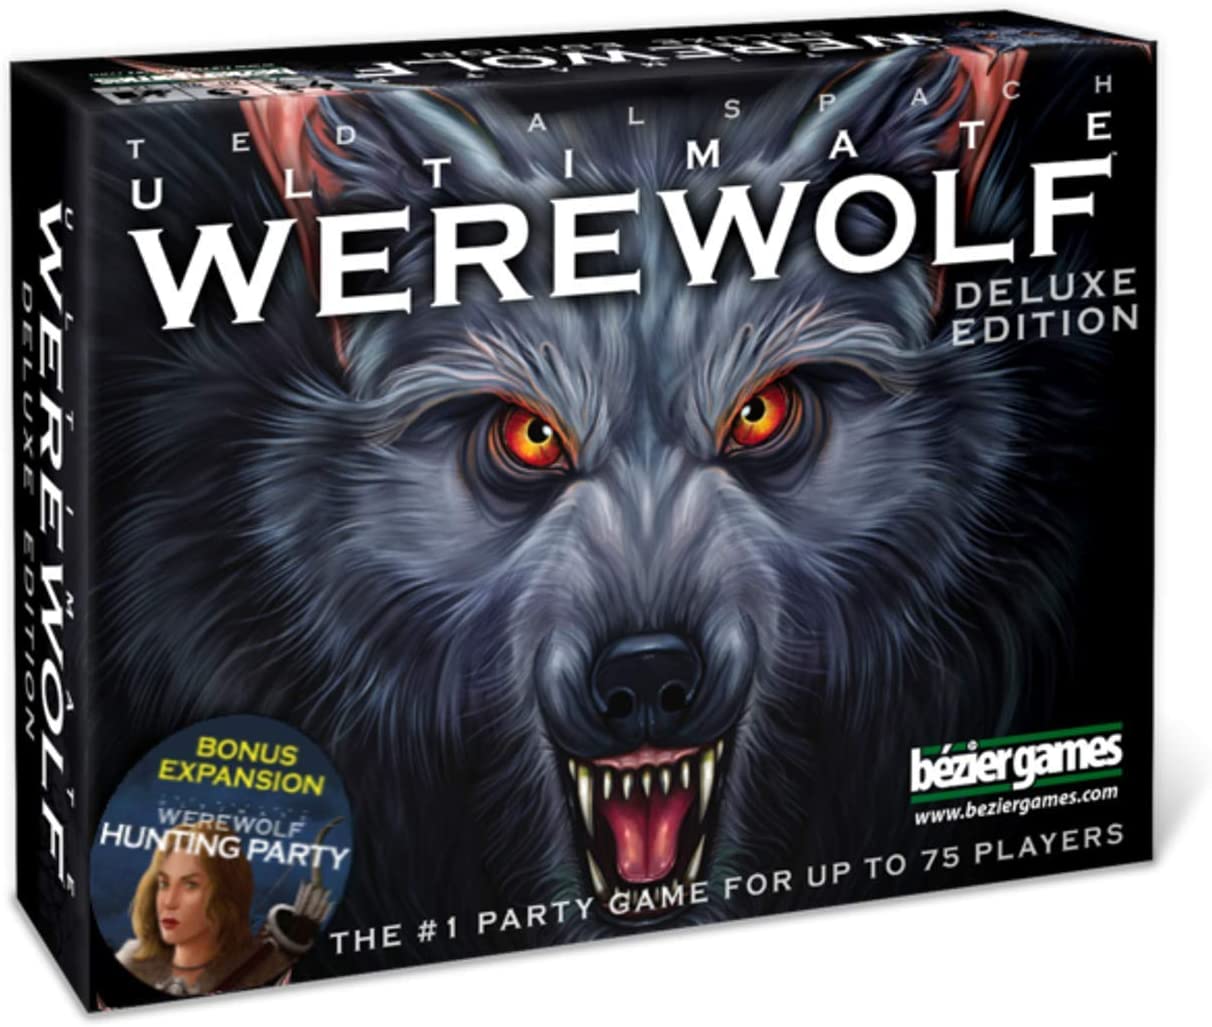 The Ultimate Werewolf Game Set